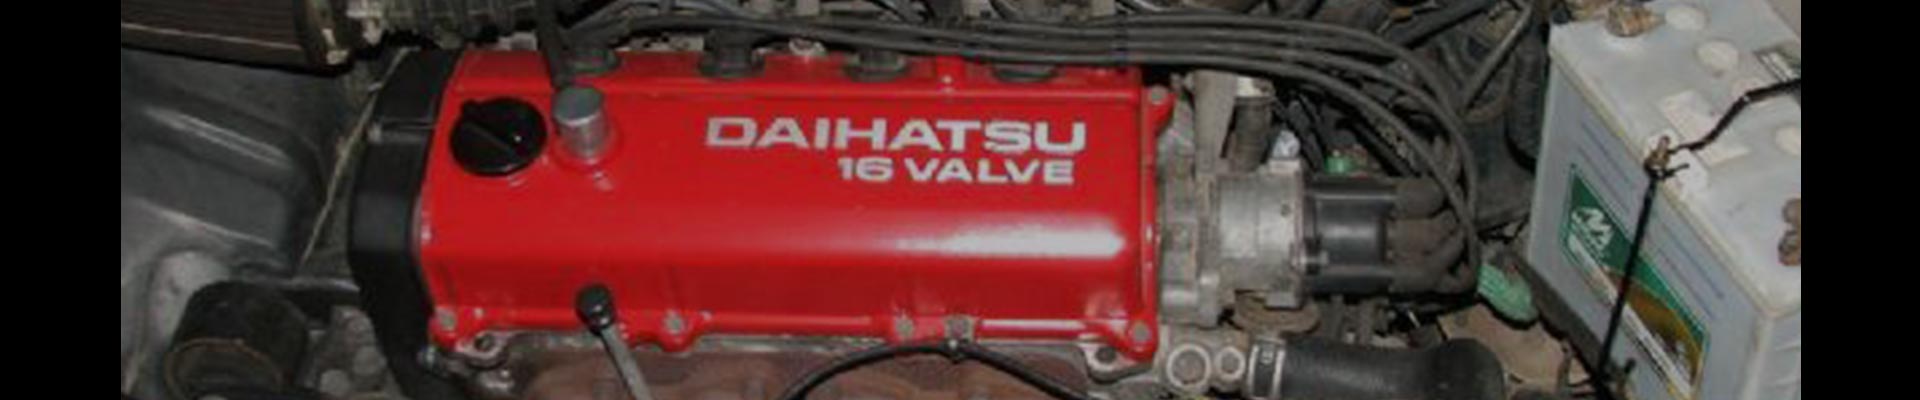 Shop Replacement Daihatsu Charade Parts with Discounted Price on the Net